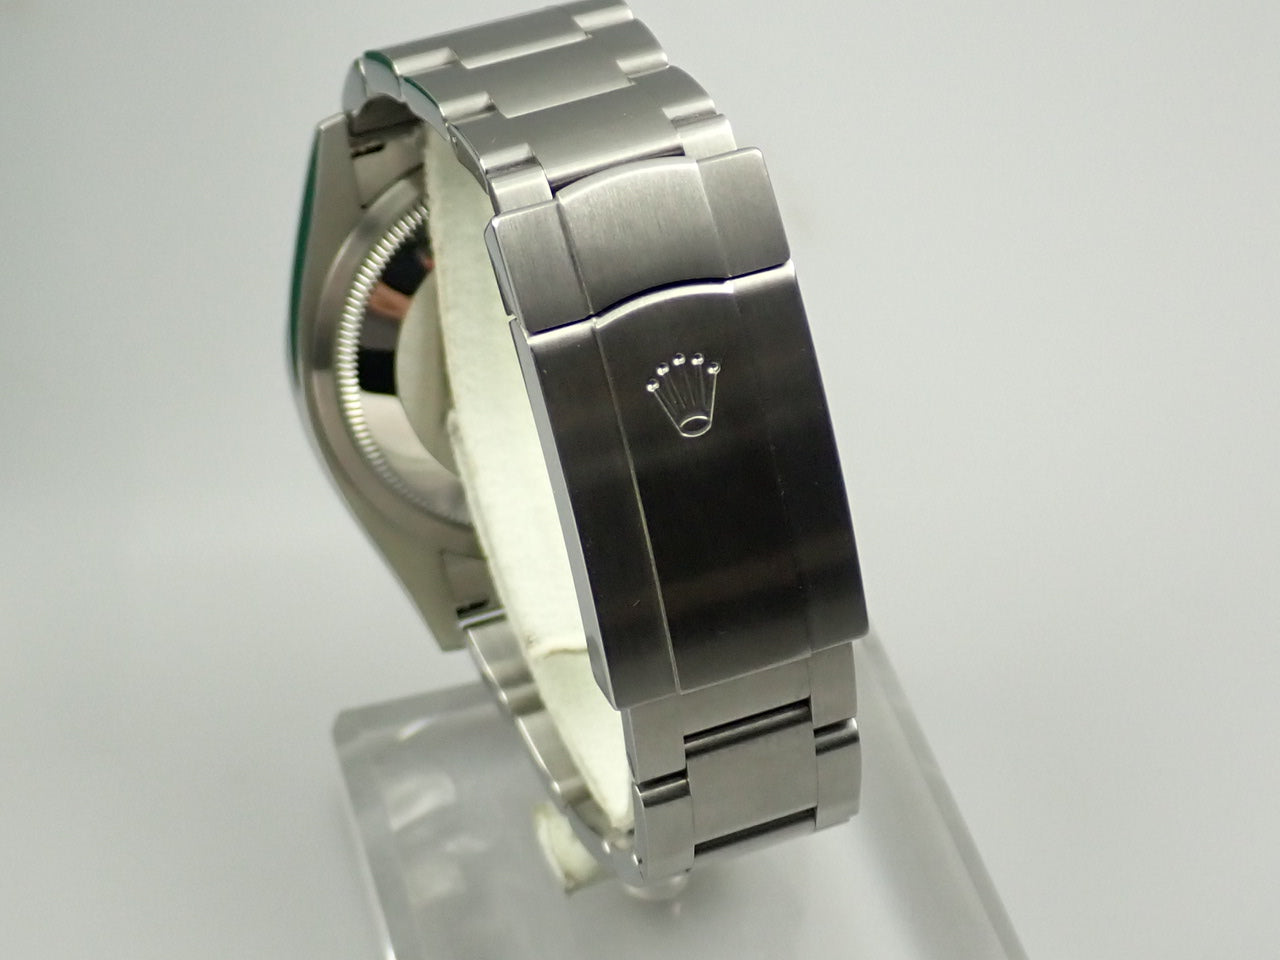 Rolex Oyster Perpetual 36 Turquoise Dial &lt;Warranty, Box, etc.&gt;